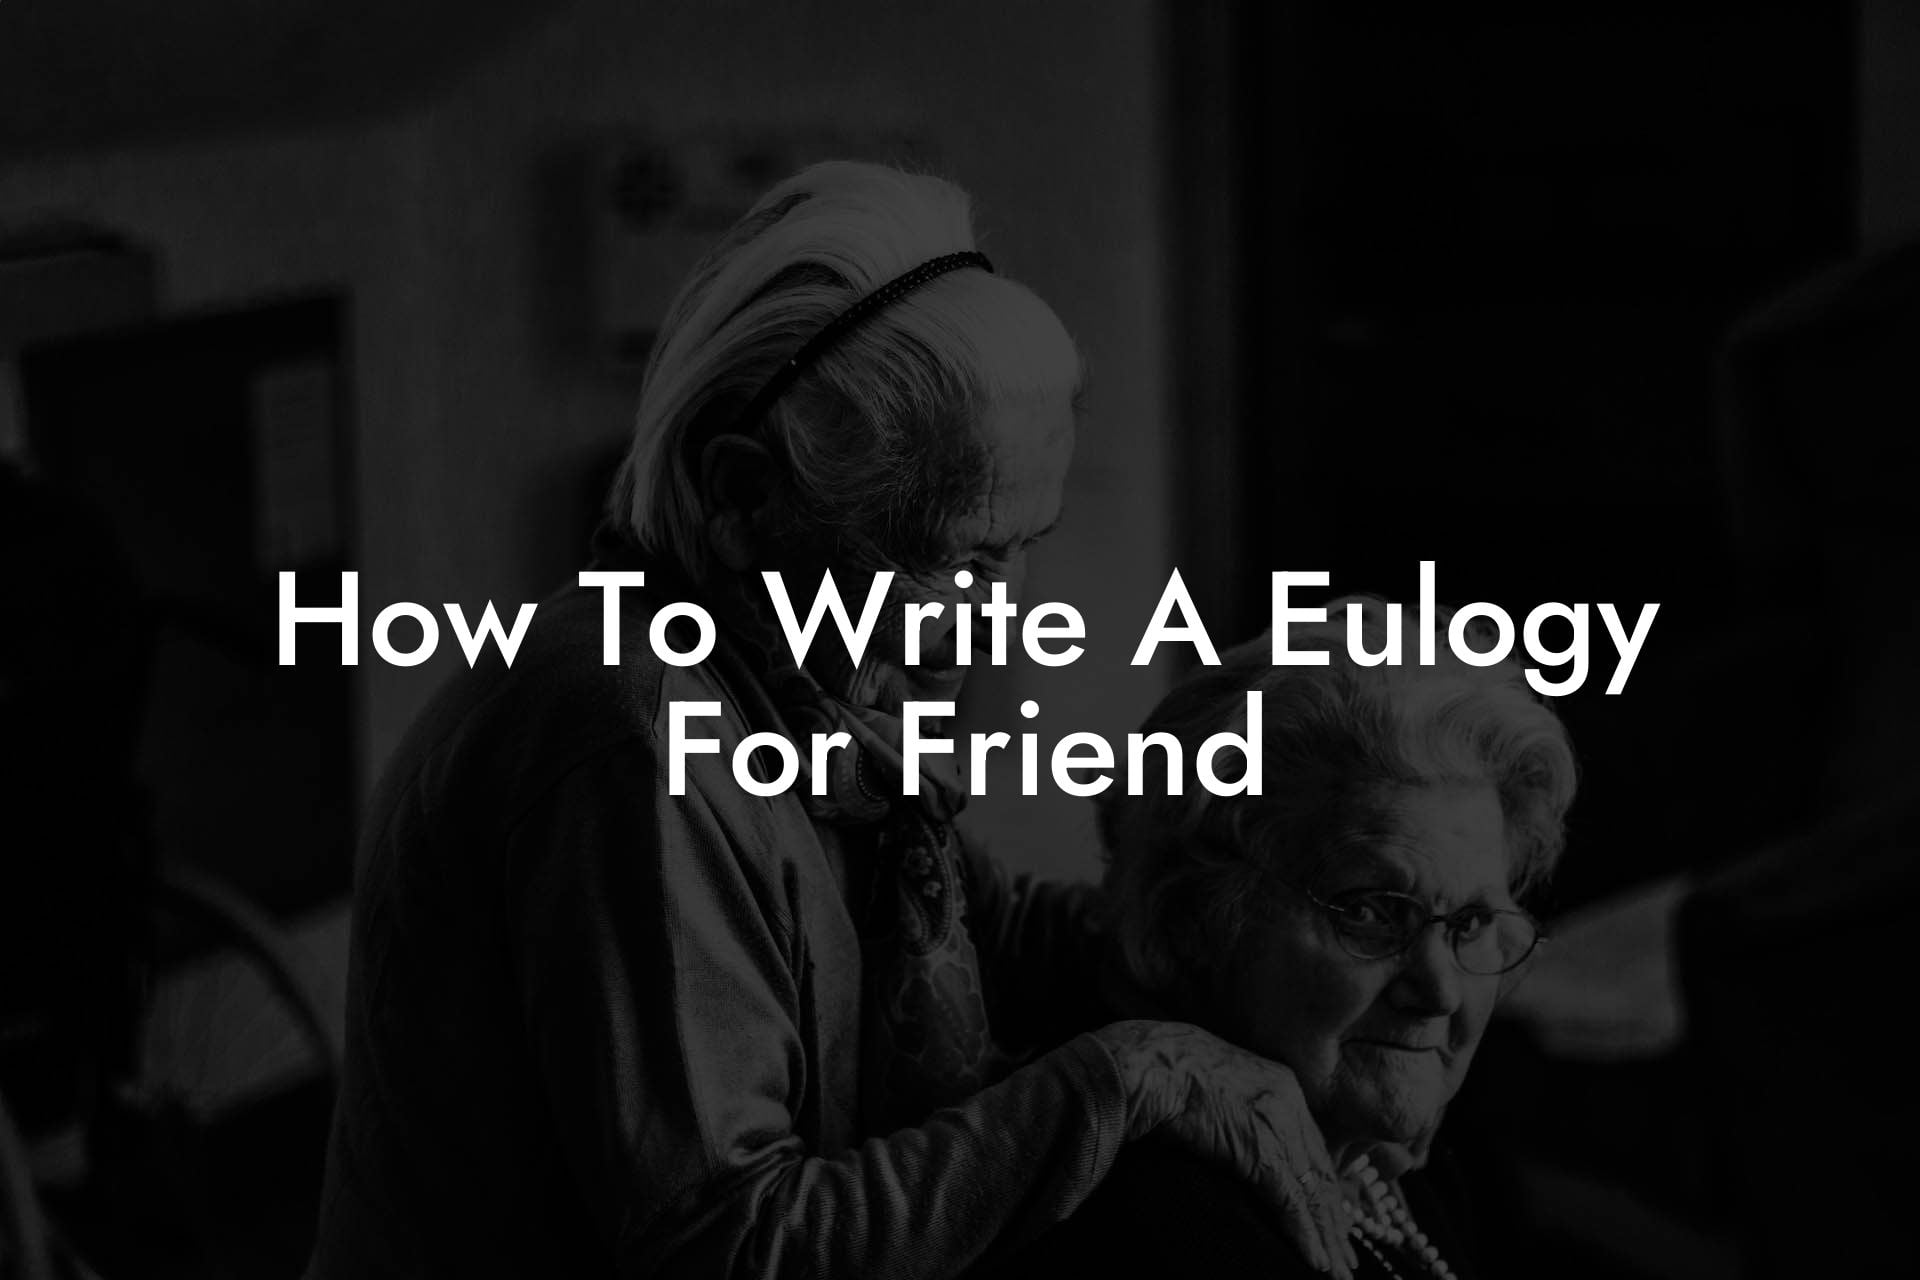 How To Write A Eulogy For Friend